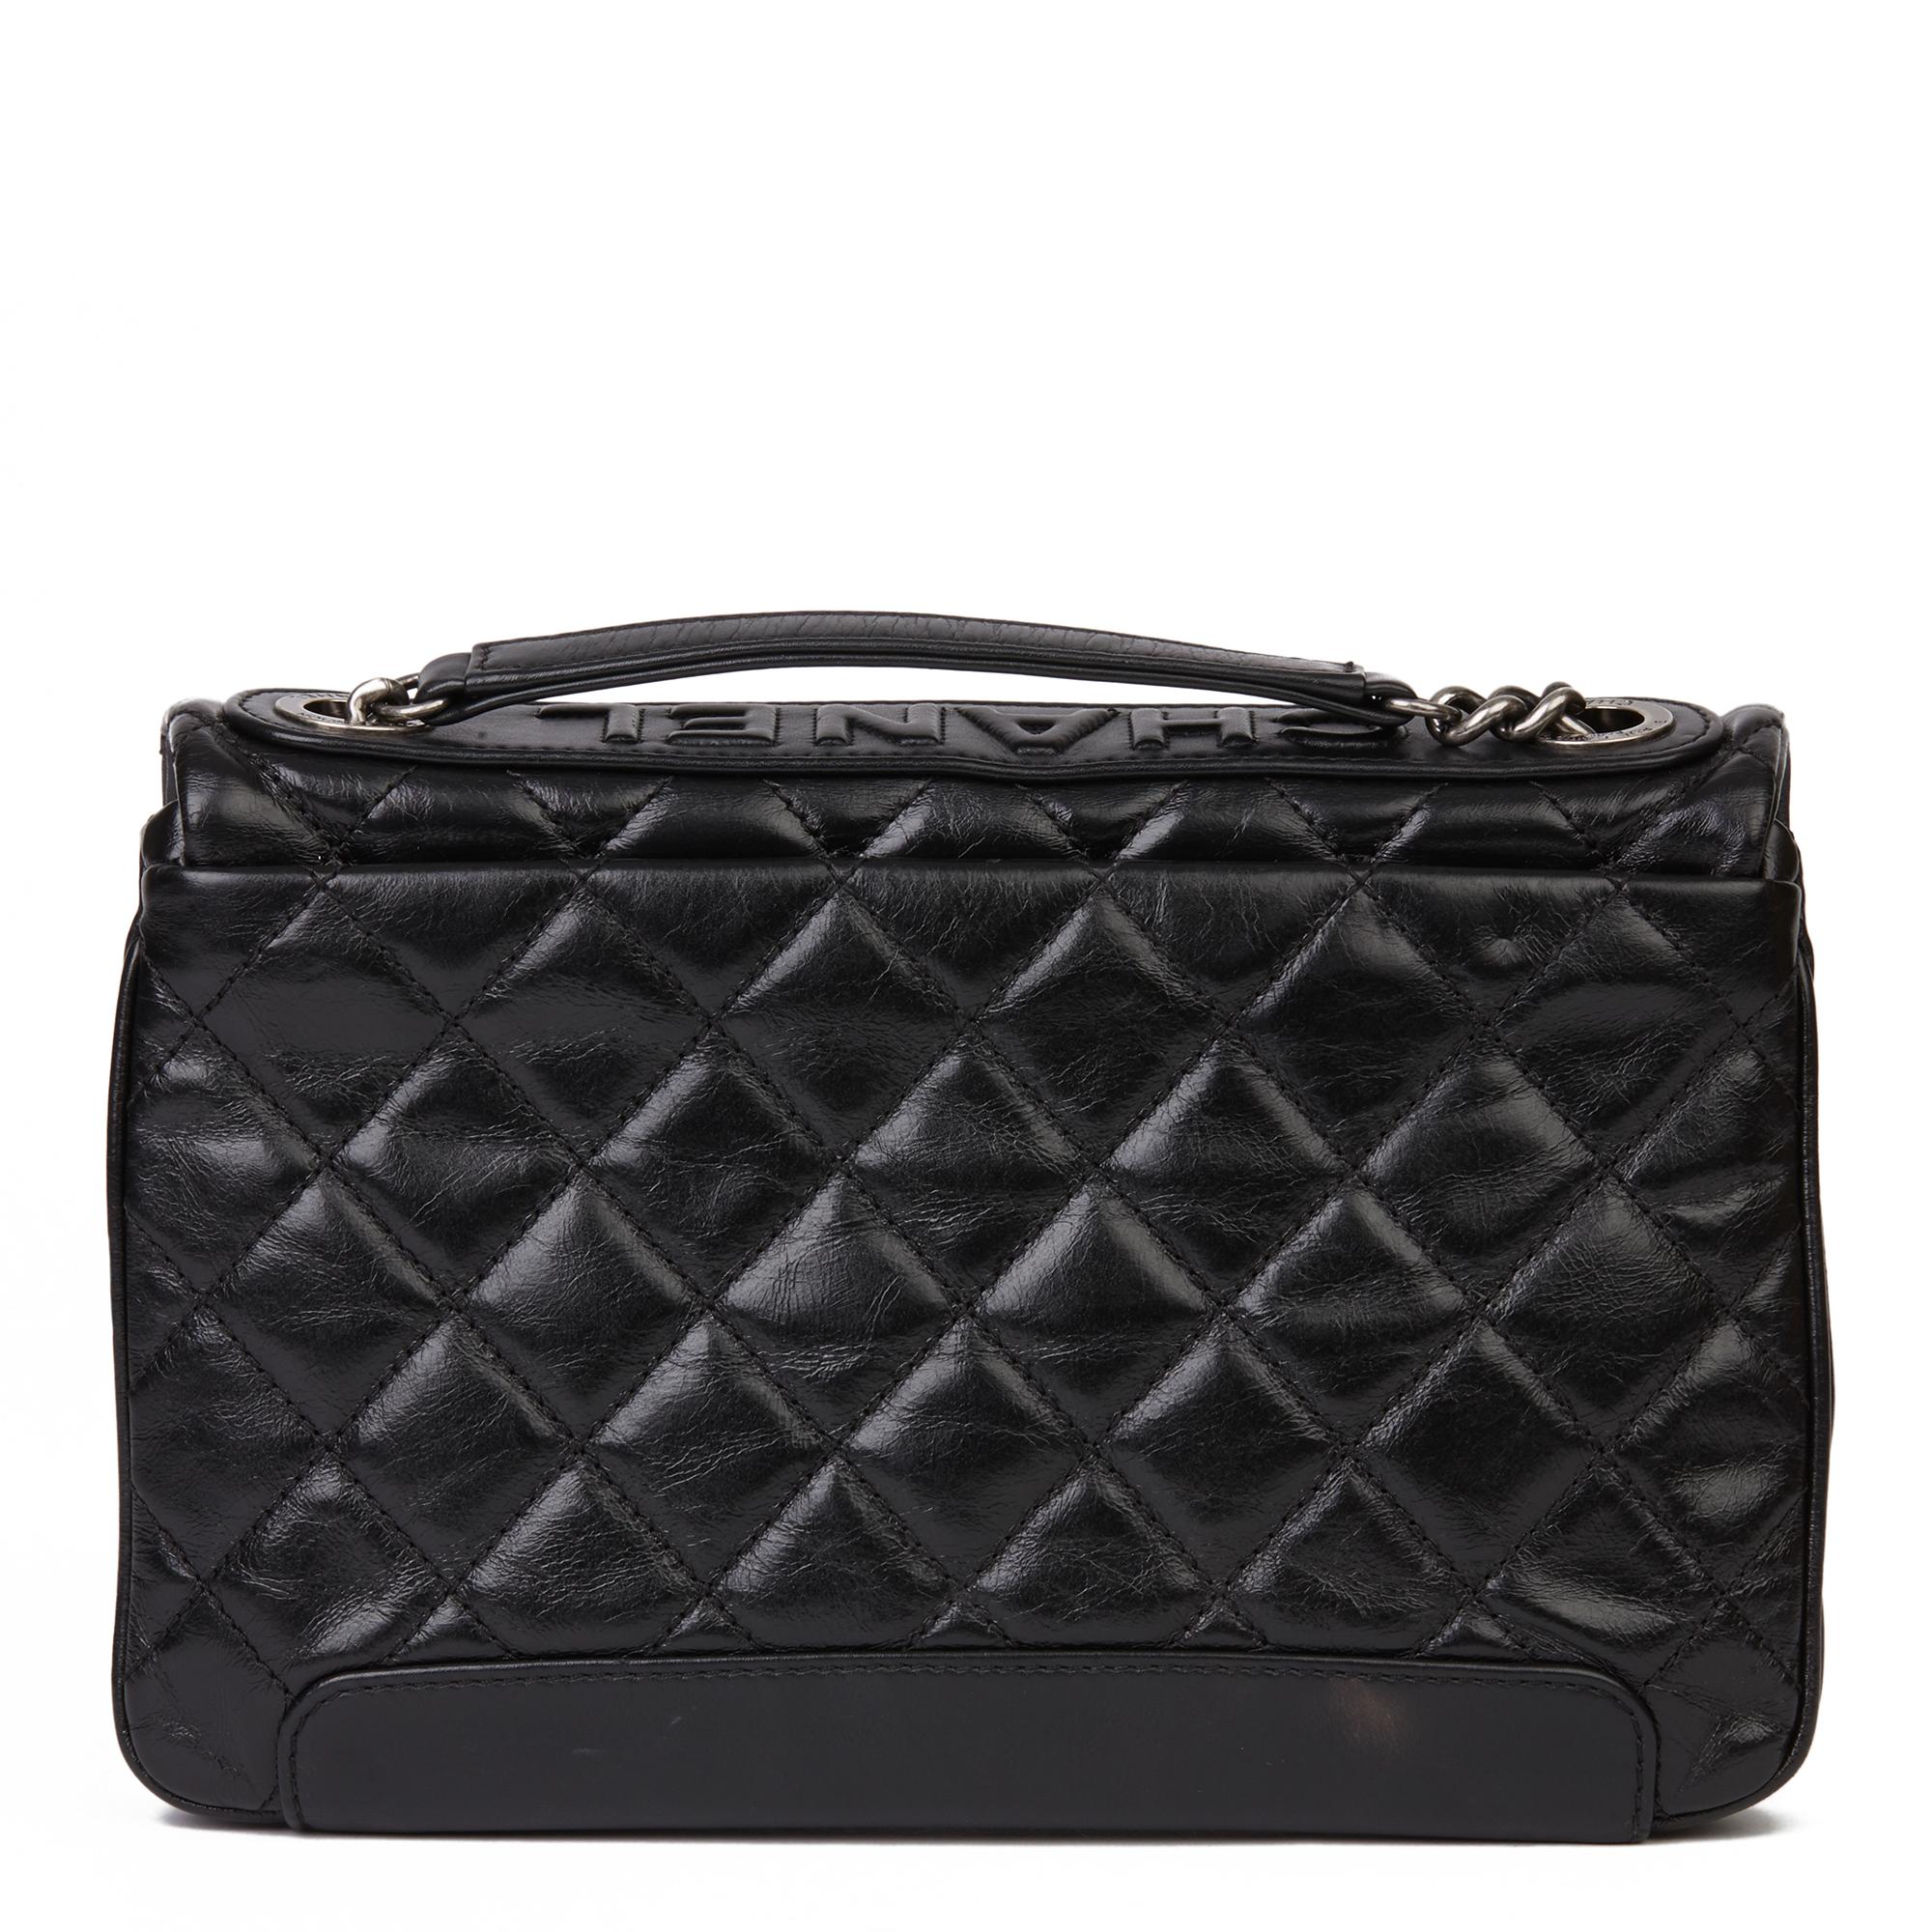 Women's 2013 Chanel Black Quilted Glazed Calfskin Leather Classic Single Flap Bag